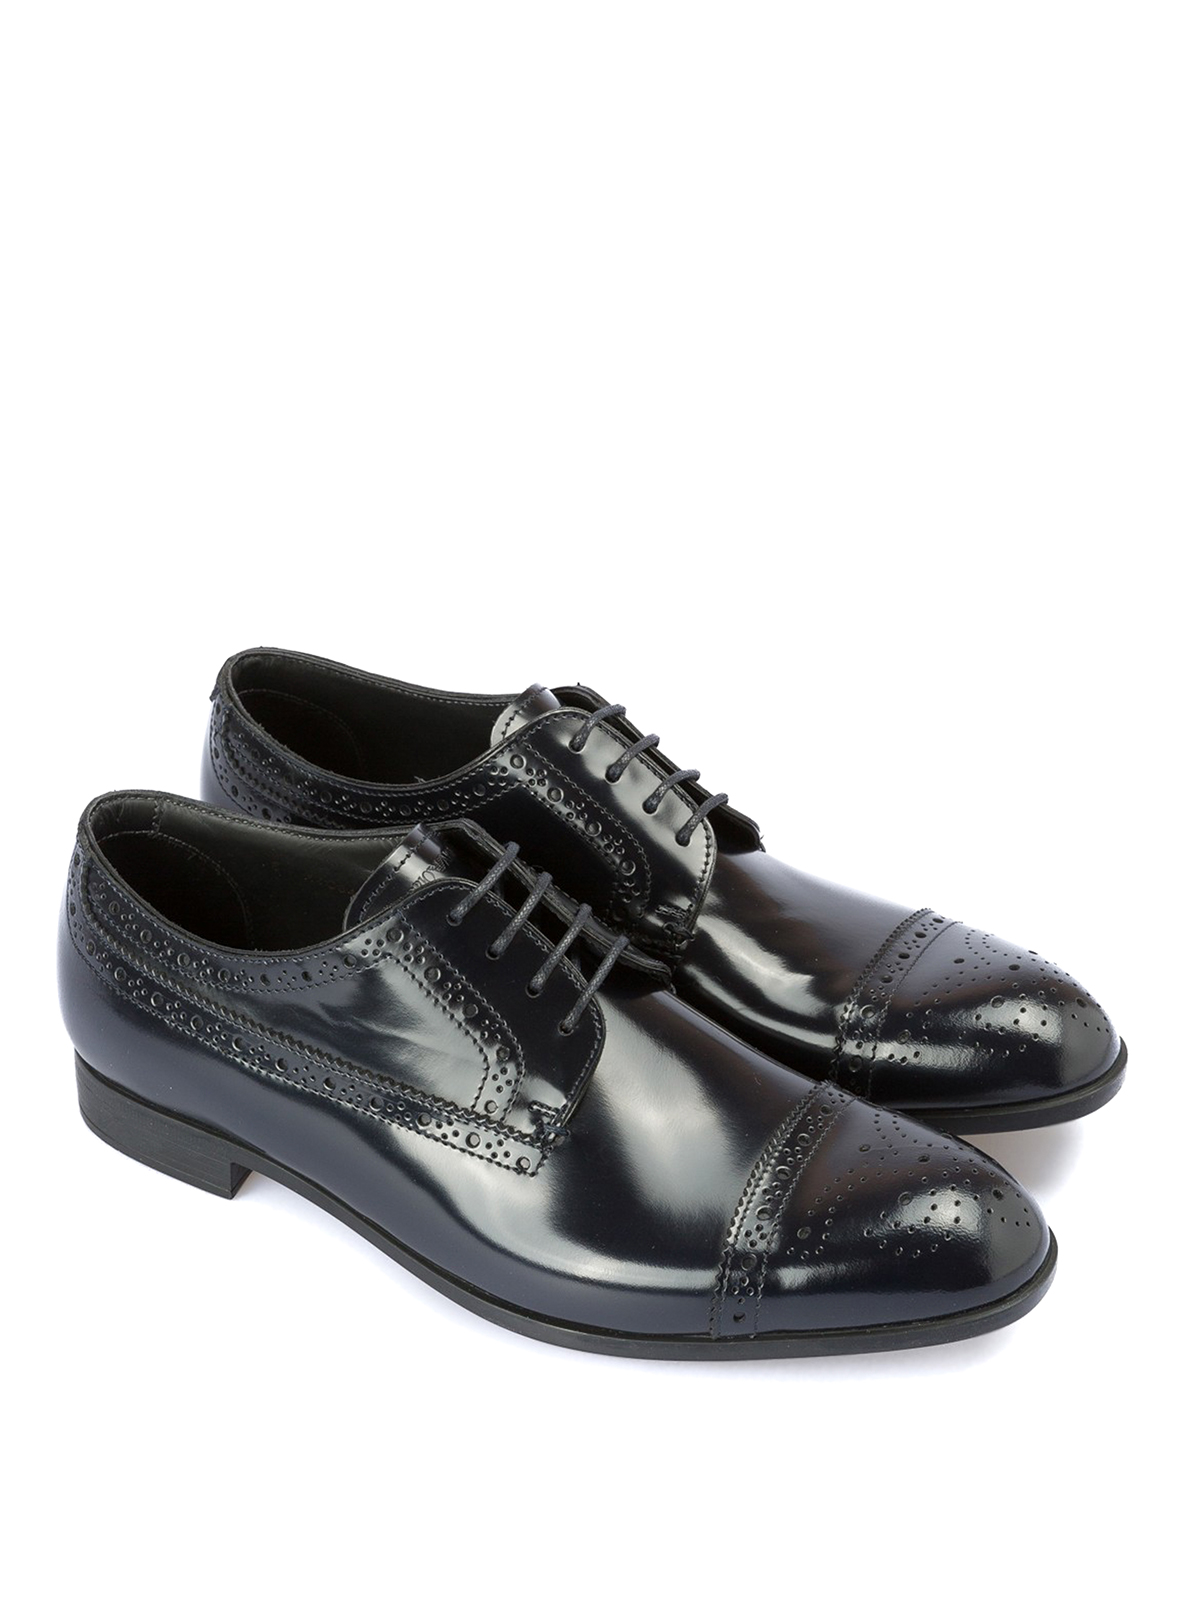 pleegouders Roos Kiezen Classic shoes Emporio Armani - Polished leather Derby shoes -  X4C345XAT0400006